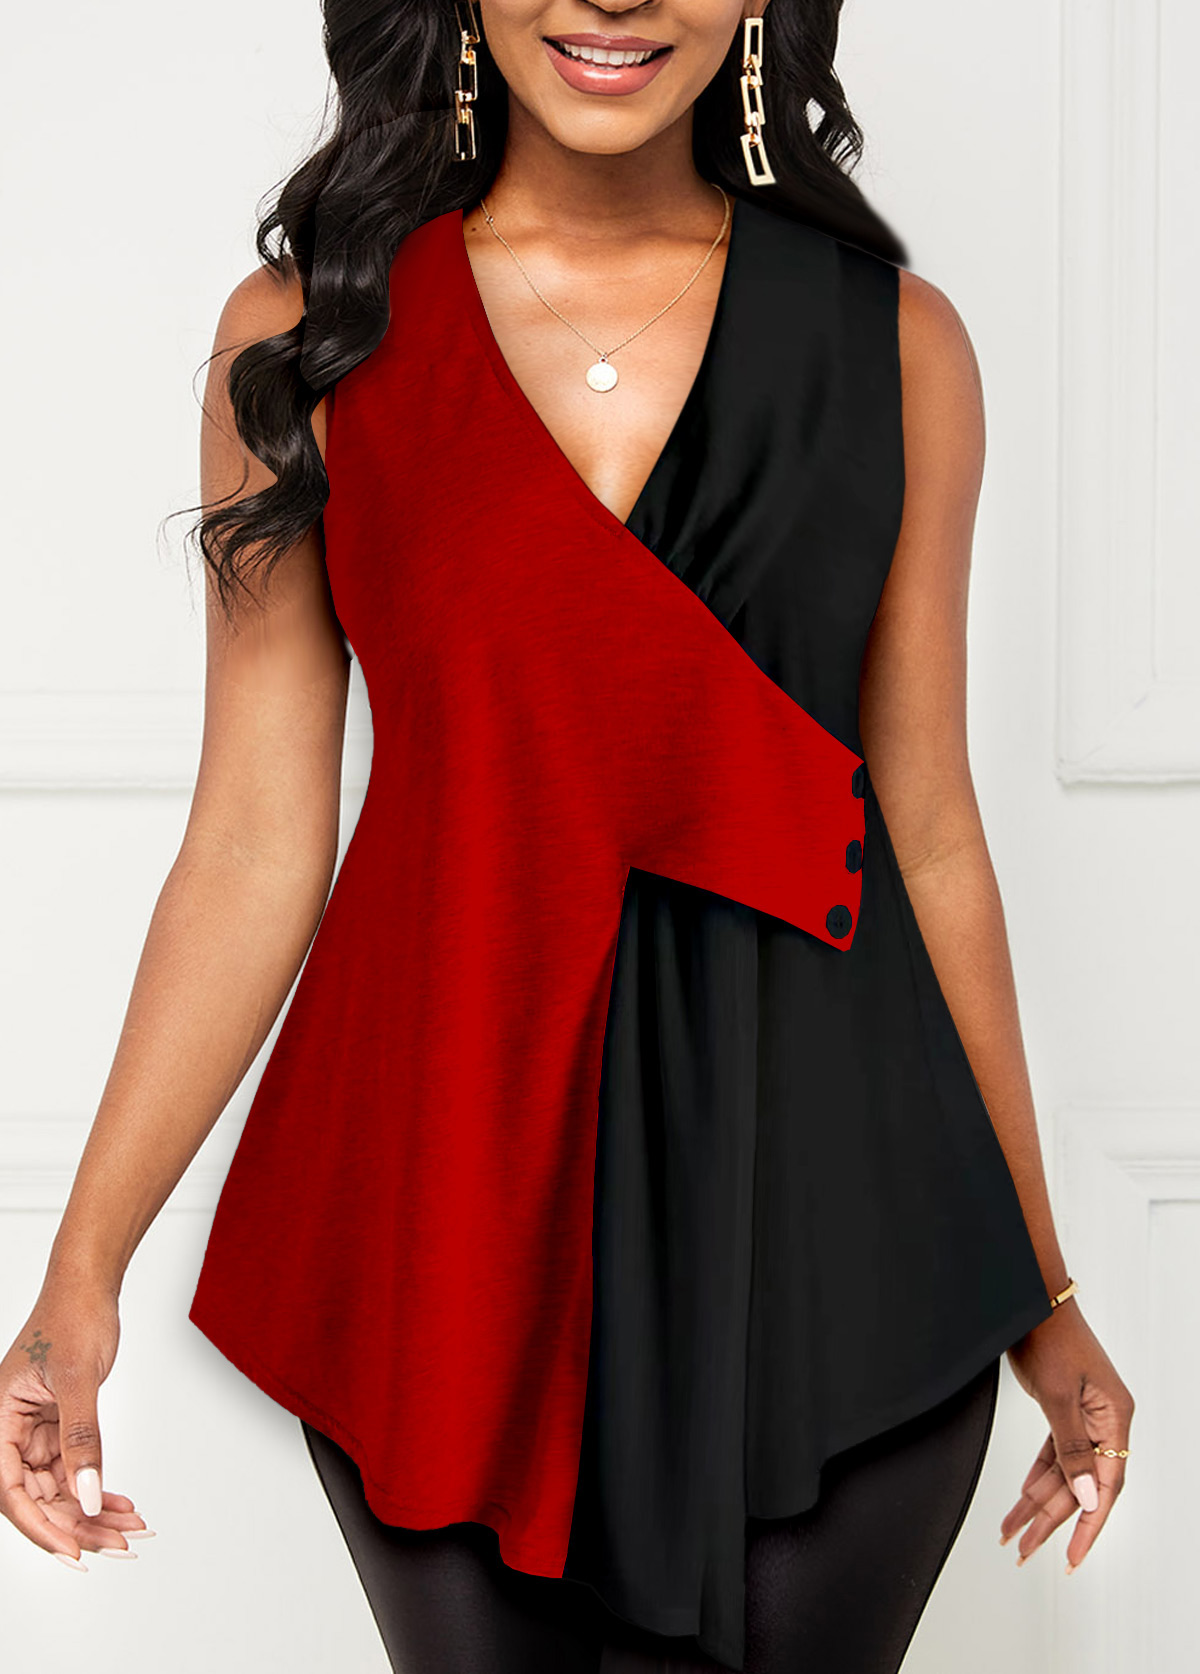 Contrast Red V Neck Tank Top